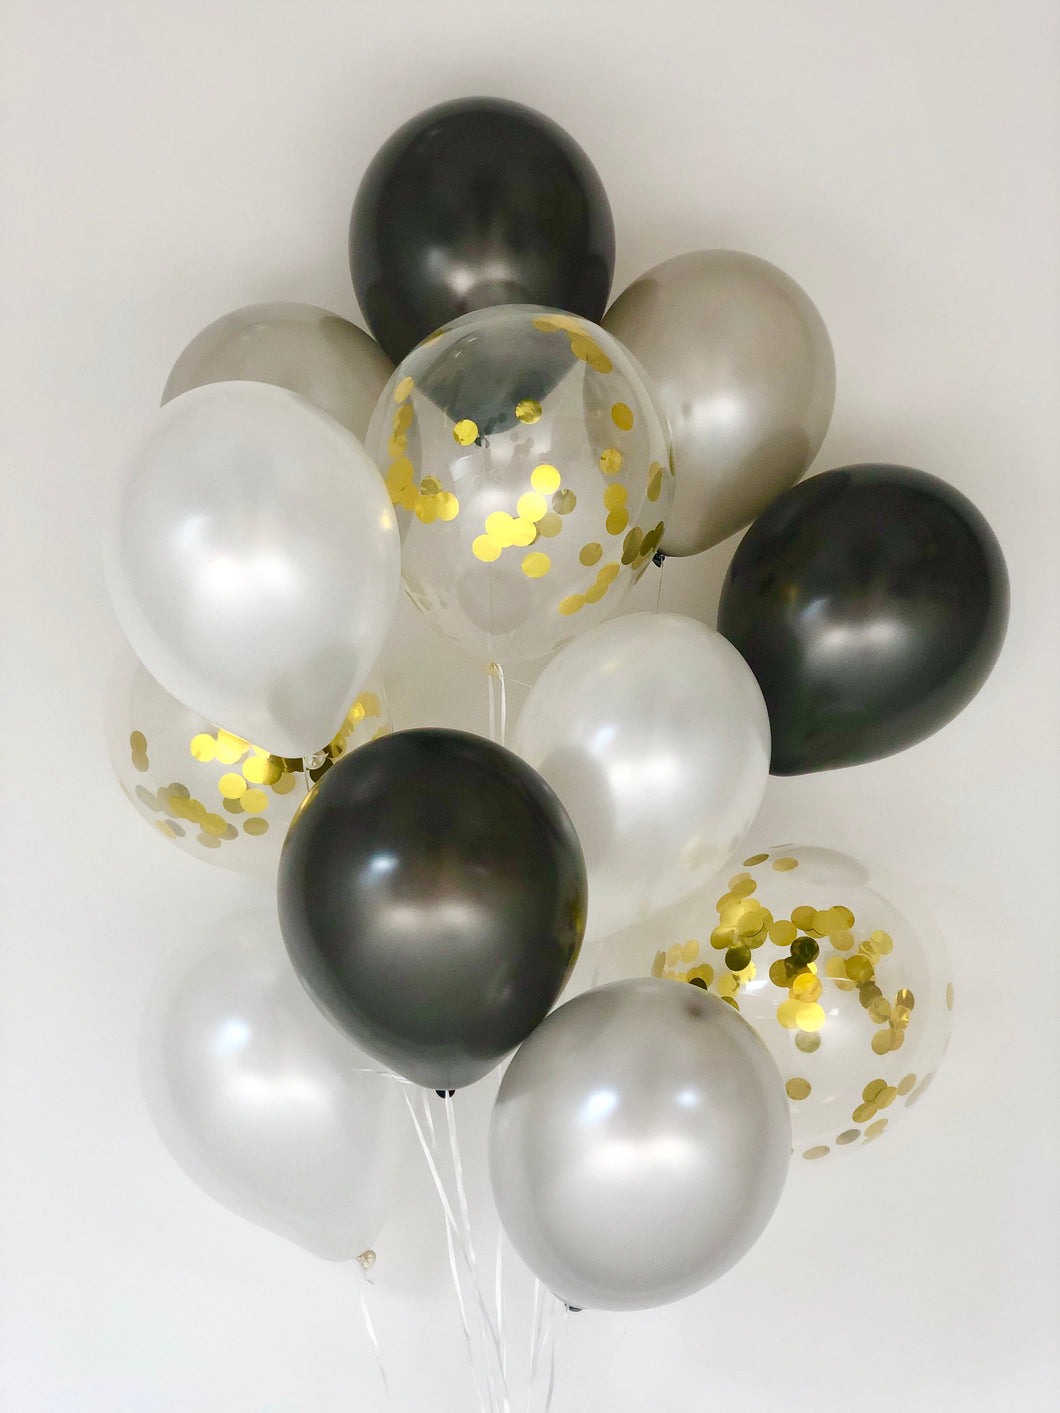 Sweet Moon 12 Piece Latex Balloons Bouquet - Baby Shower, Bridal Shower, Eid, and Ramadan Party Decoration (Black)